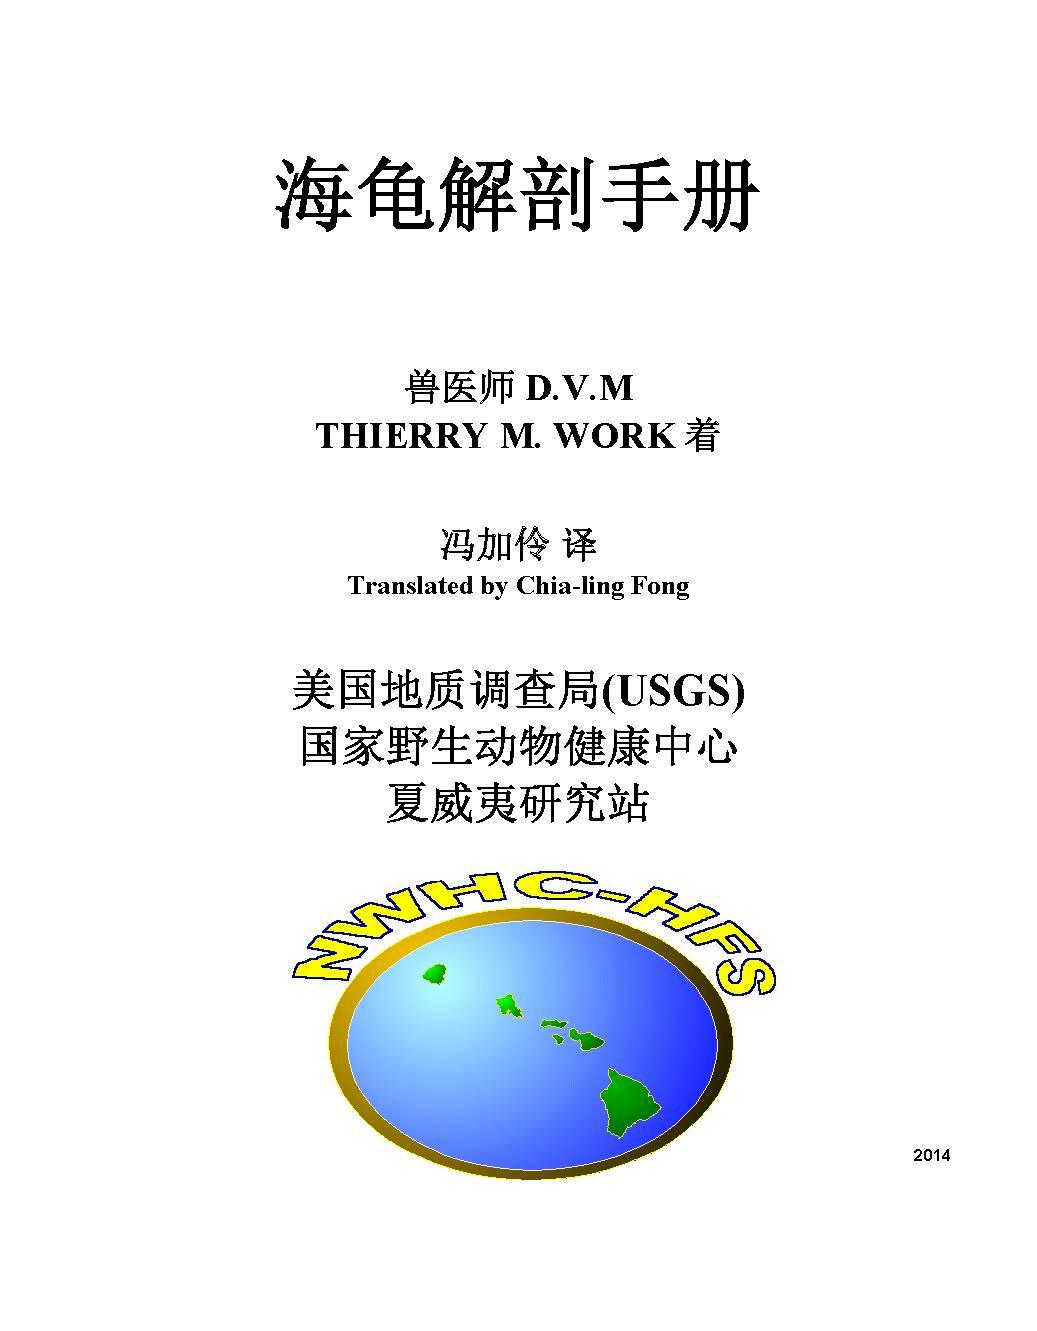 Sea turtle necropsy manual in simplified chinese